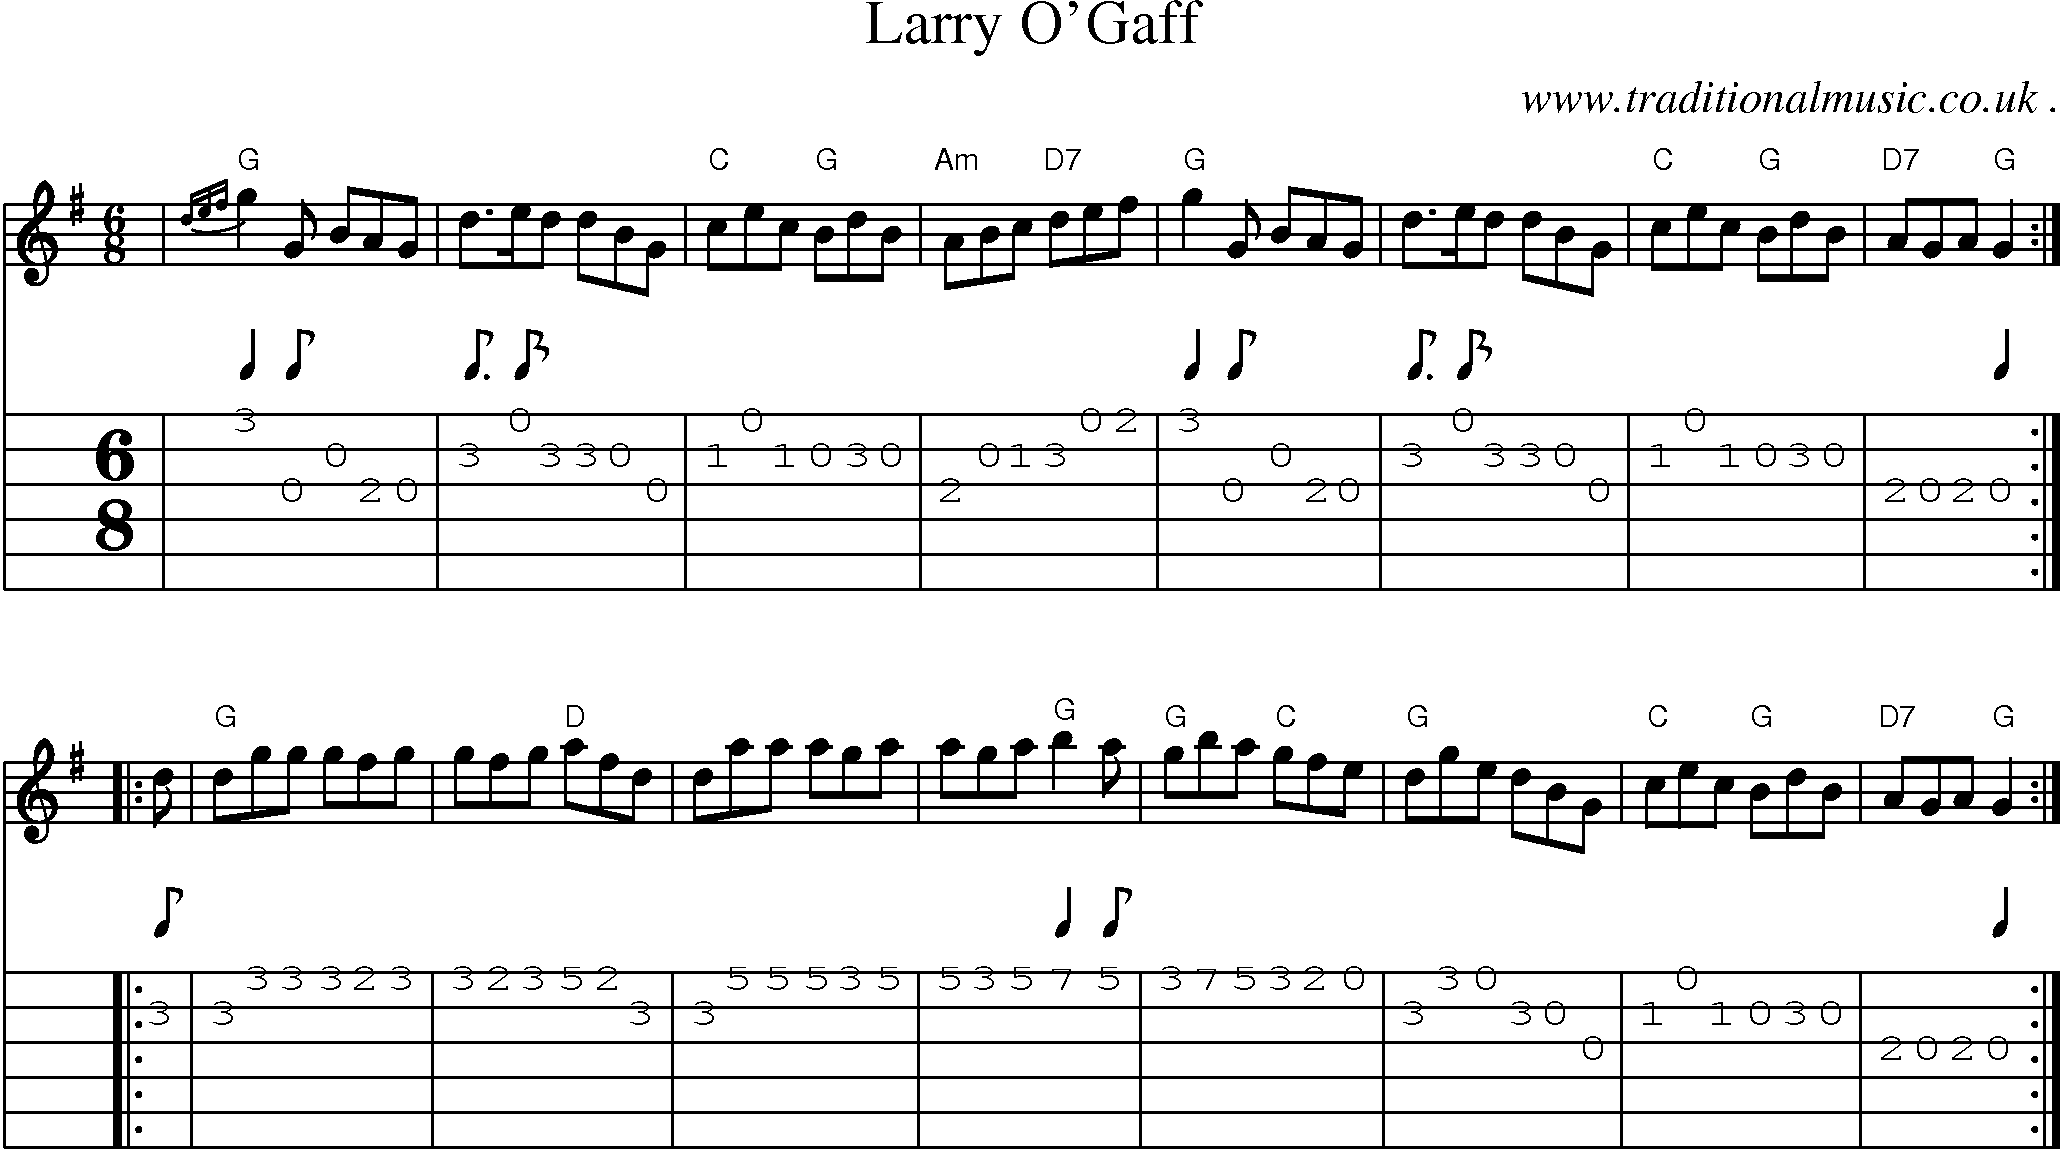 Sheet-music  score, Chords and Guitar Tabs for Larry Ogaff